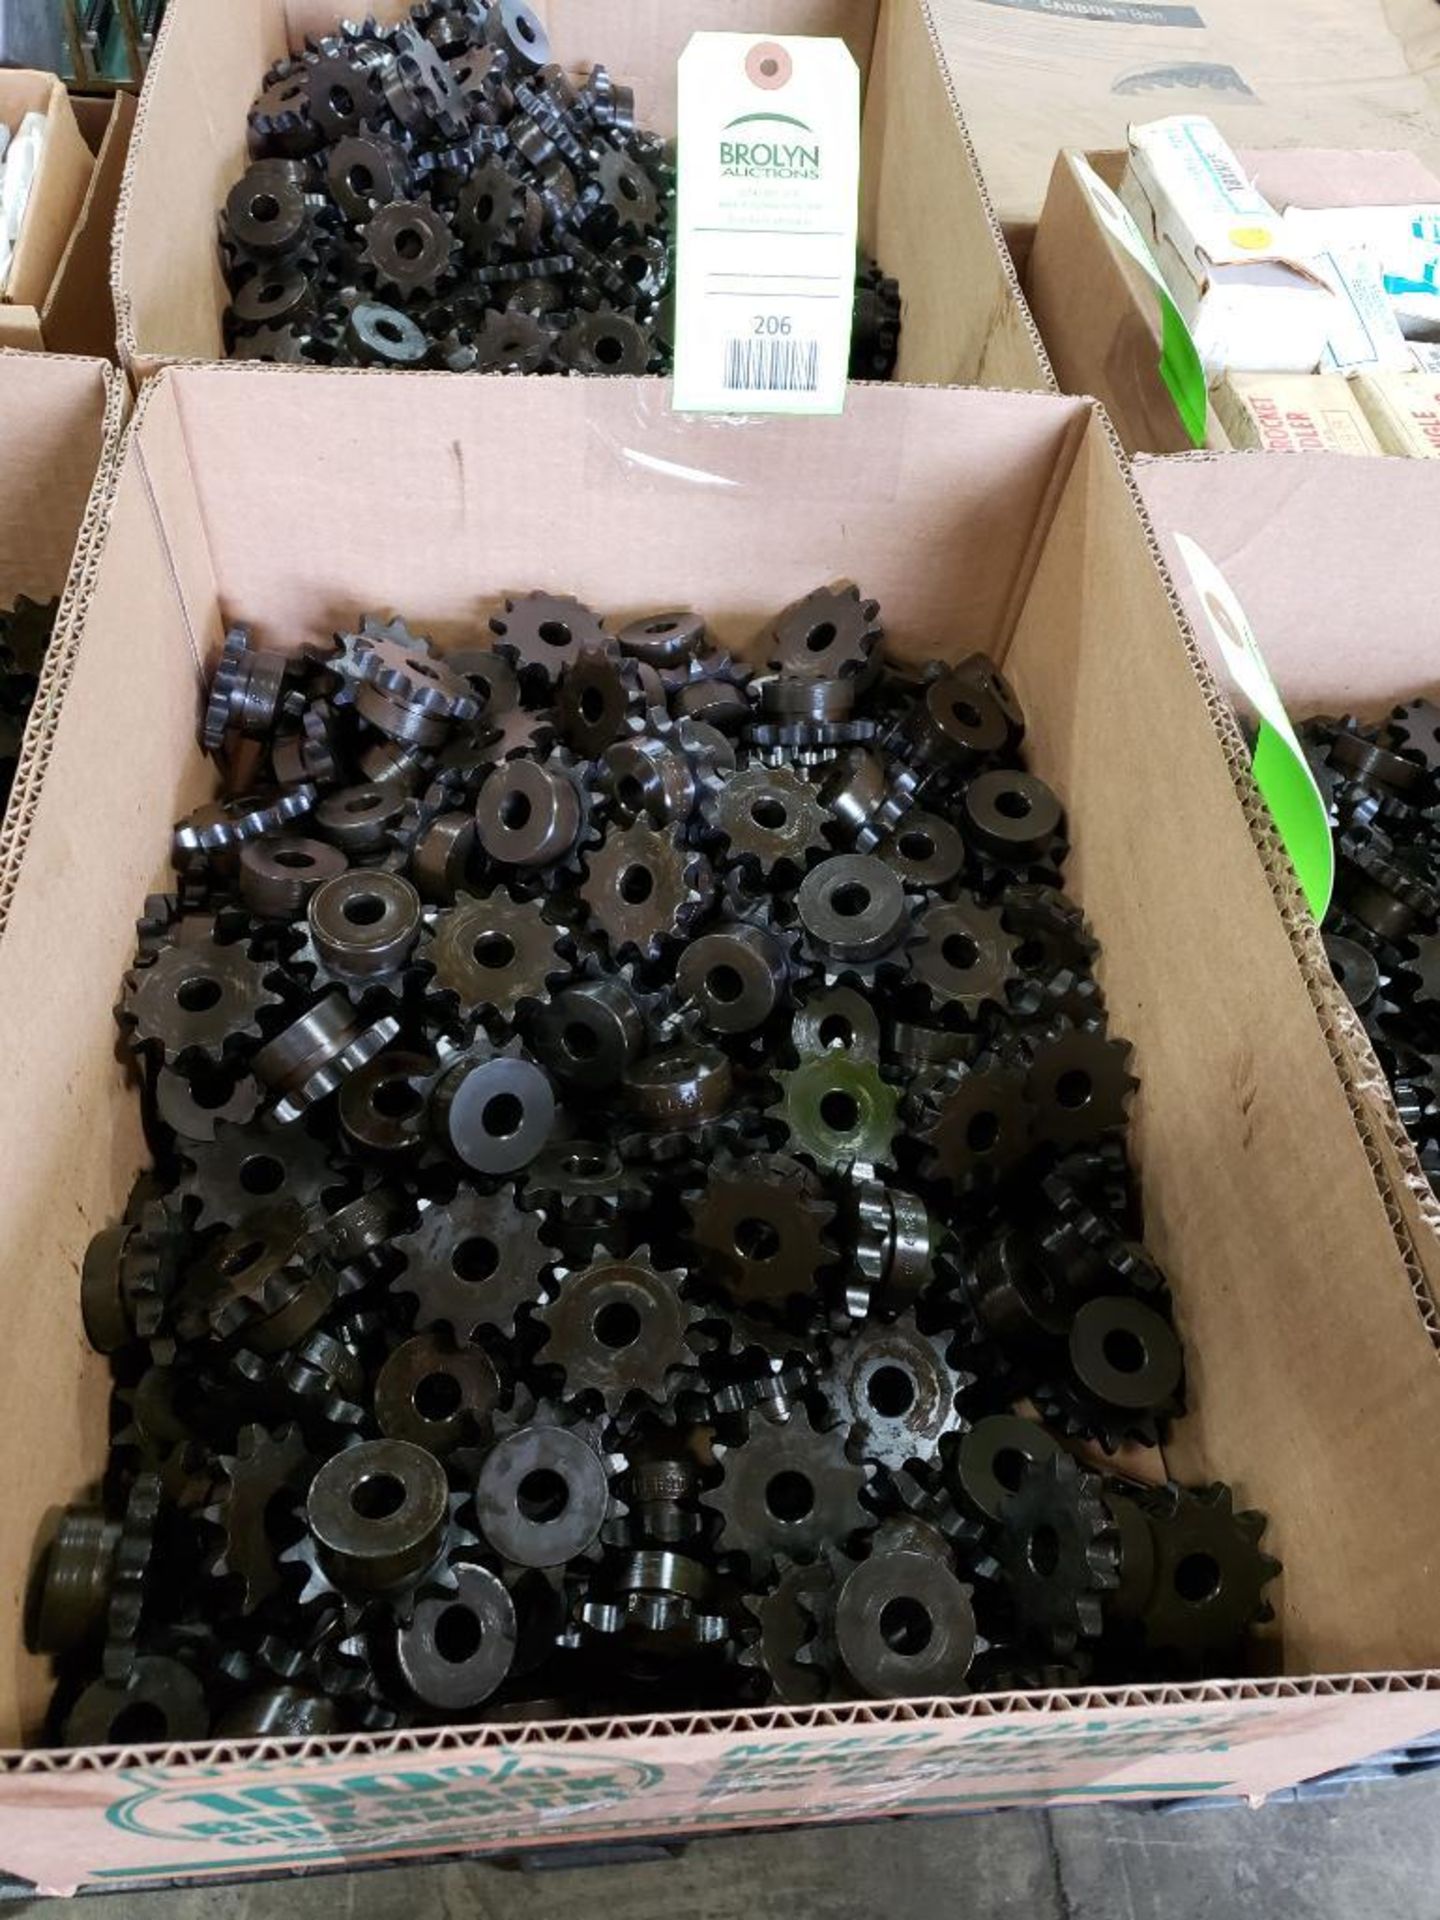 Large qty of Martin sprockets. Part number 40B11. New bulk stock.